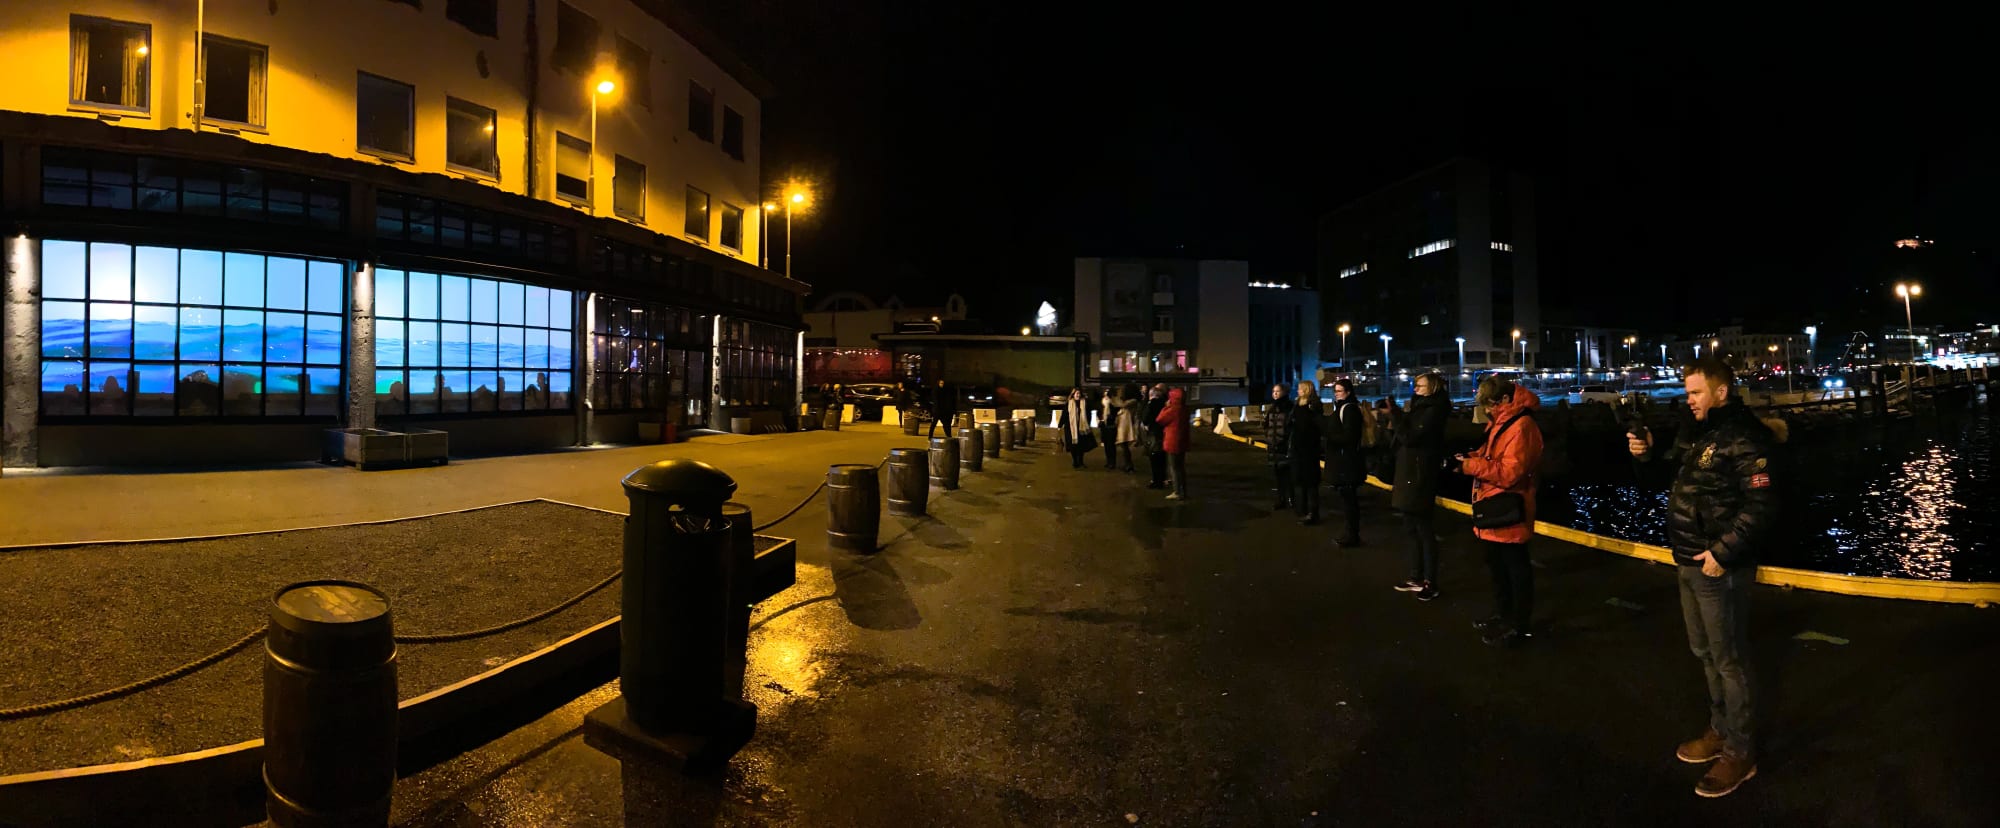 Panoramic photograph with Water Will Be Here - a video installation projected into the windows of a bar showing water ebbing and flowing slowly - on the left and several spectators outside of the bar on the right, with a body of water behind them